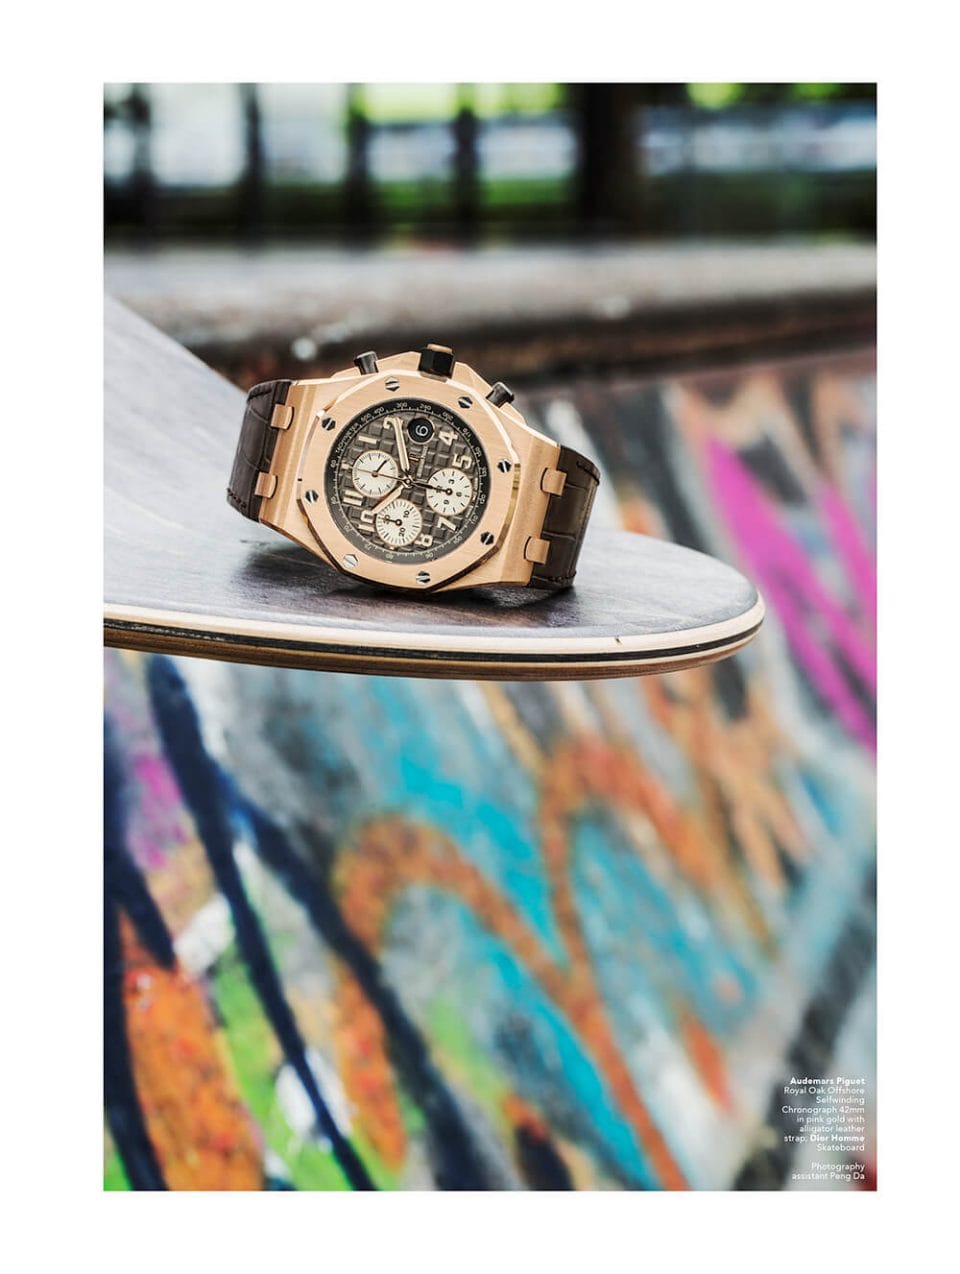 Audemars Piguet Royal Oak Offshore Selfwinding Chronograph 42mm in pink gold with alligator leather strap; Dior Homme Skateboard